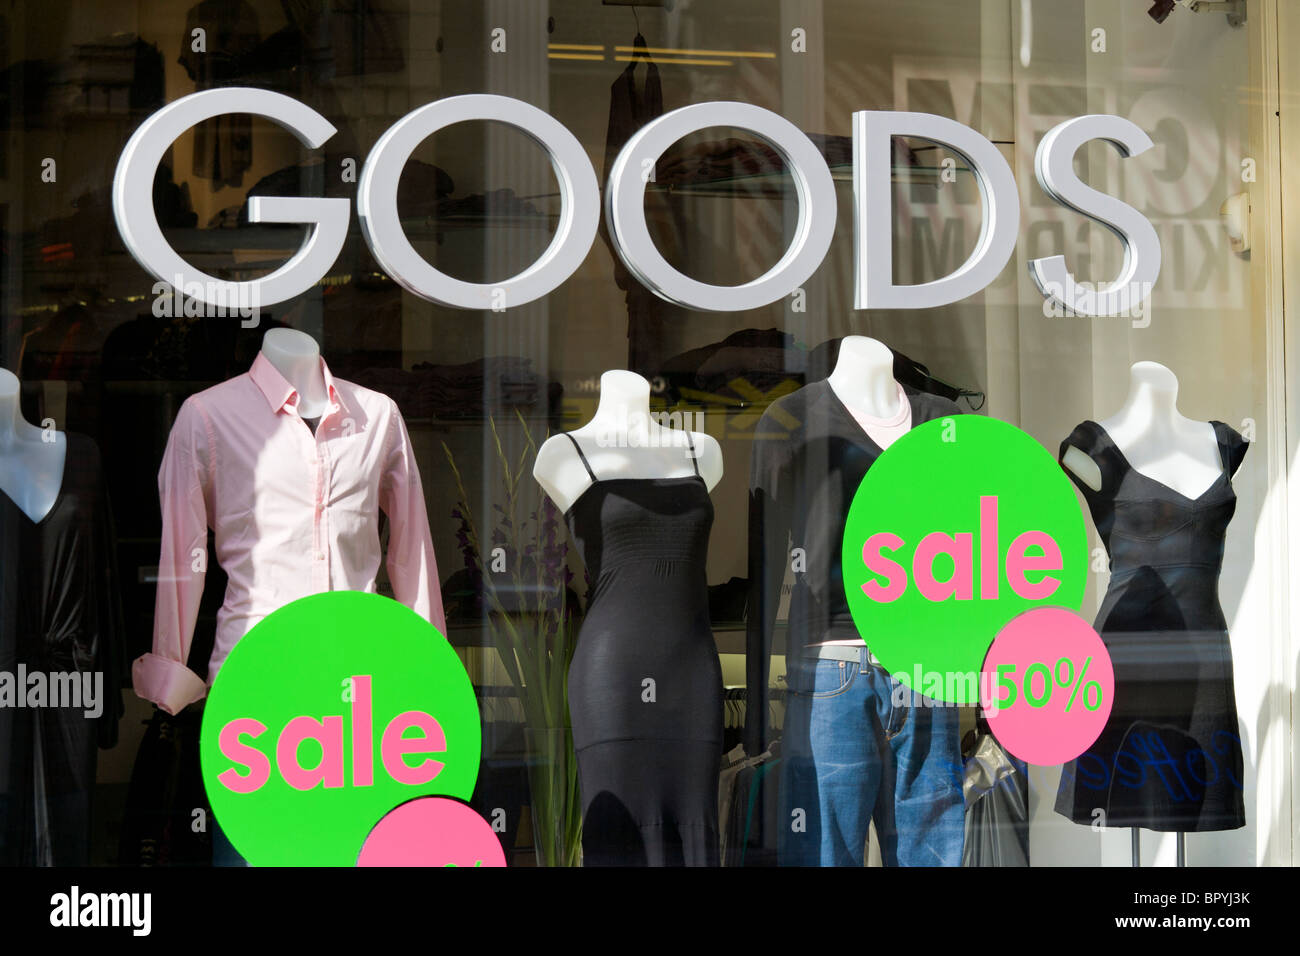 Summer Sale at Goods Casual at Huidenstraat 16, one of the 9 Little Streets, unique shopping district in Amsterdam. Stock Photo